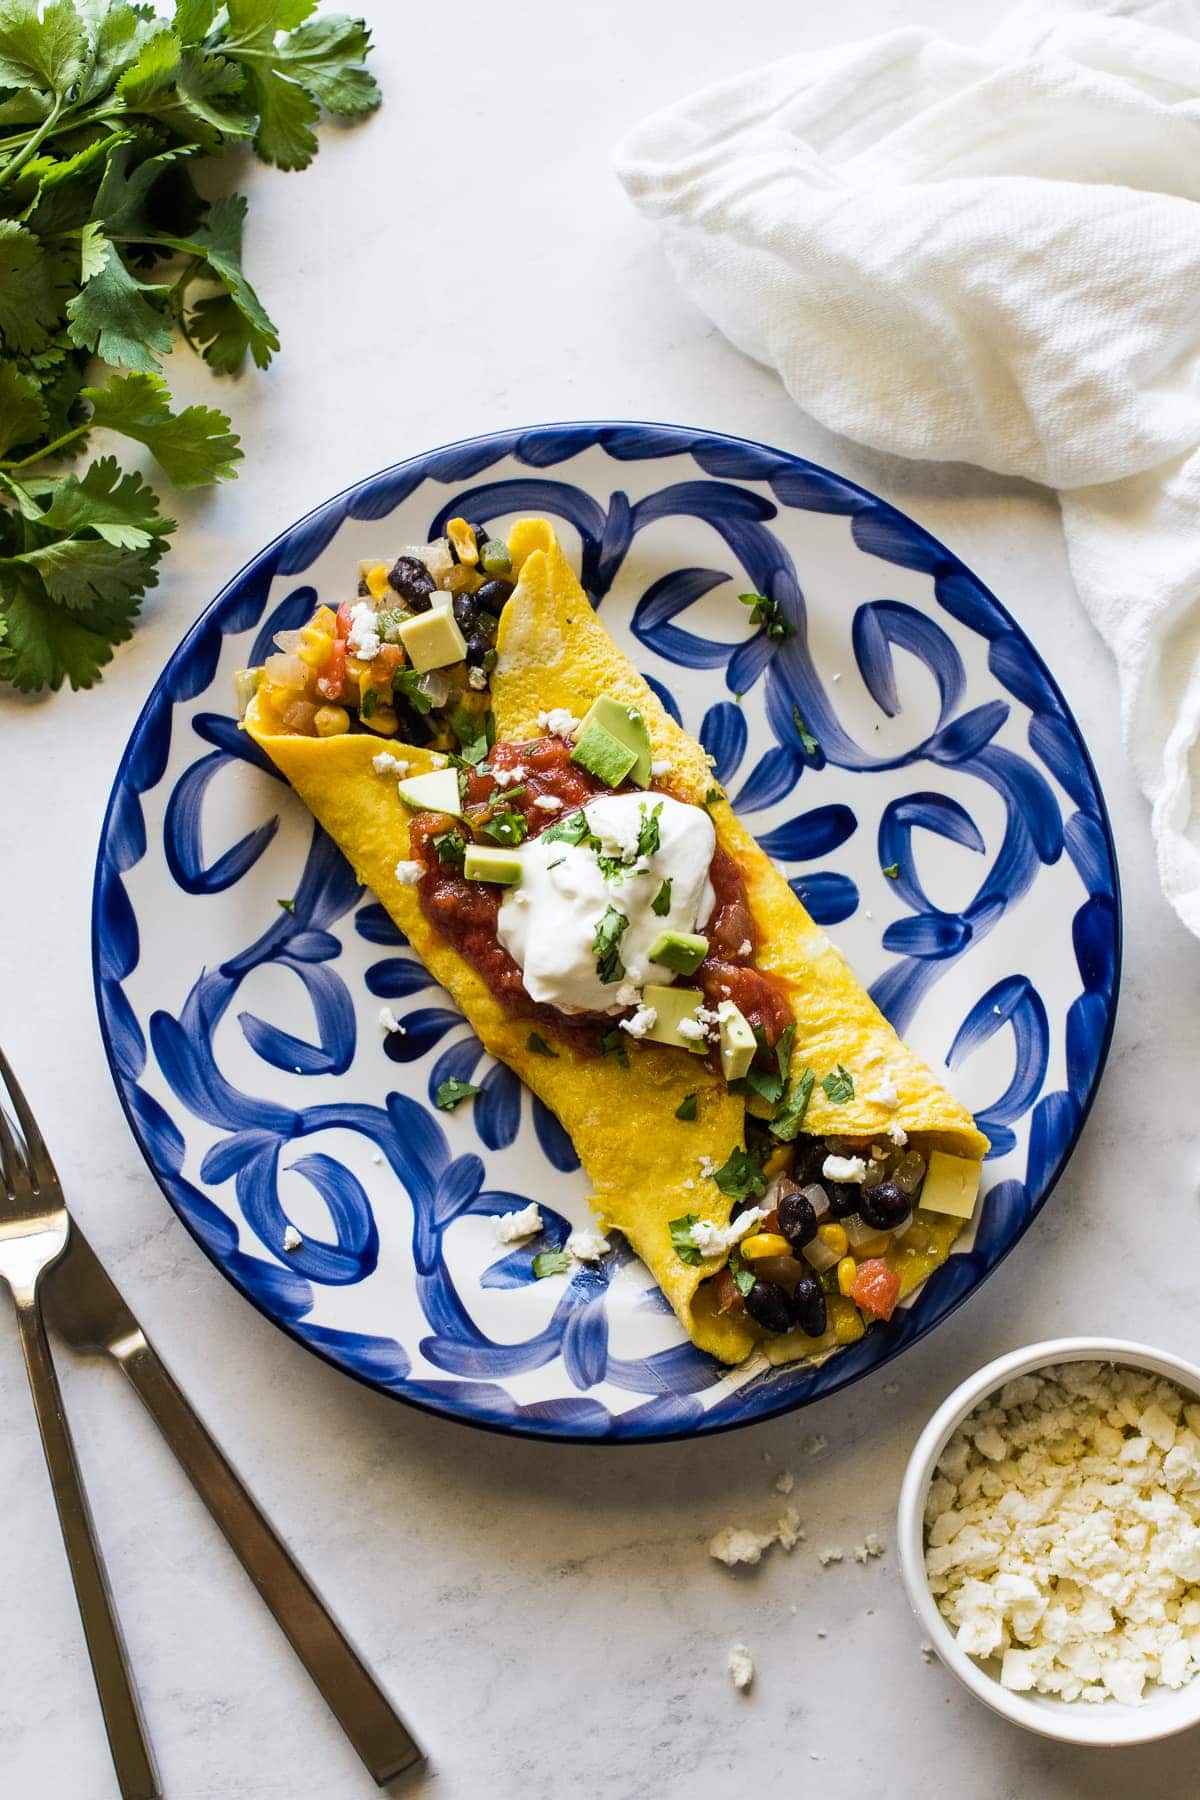 Mexican Omelet